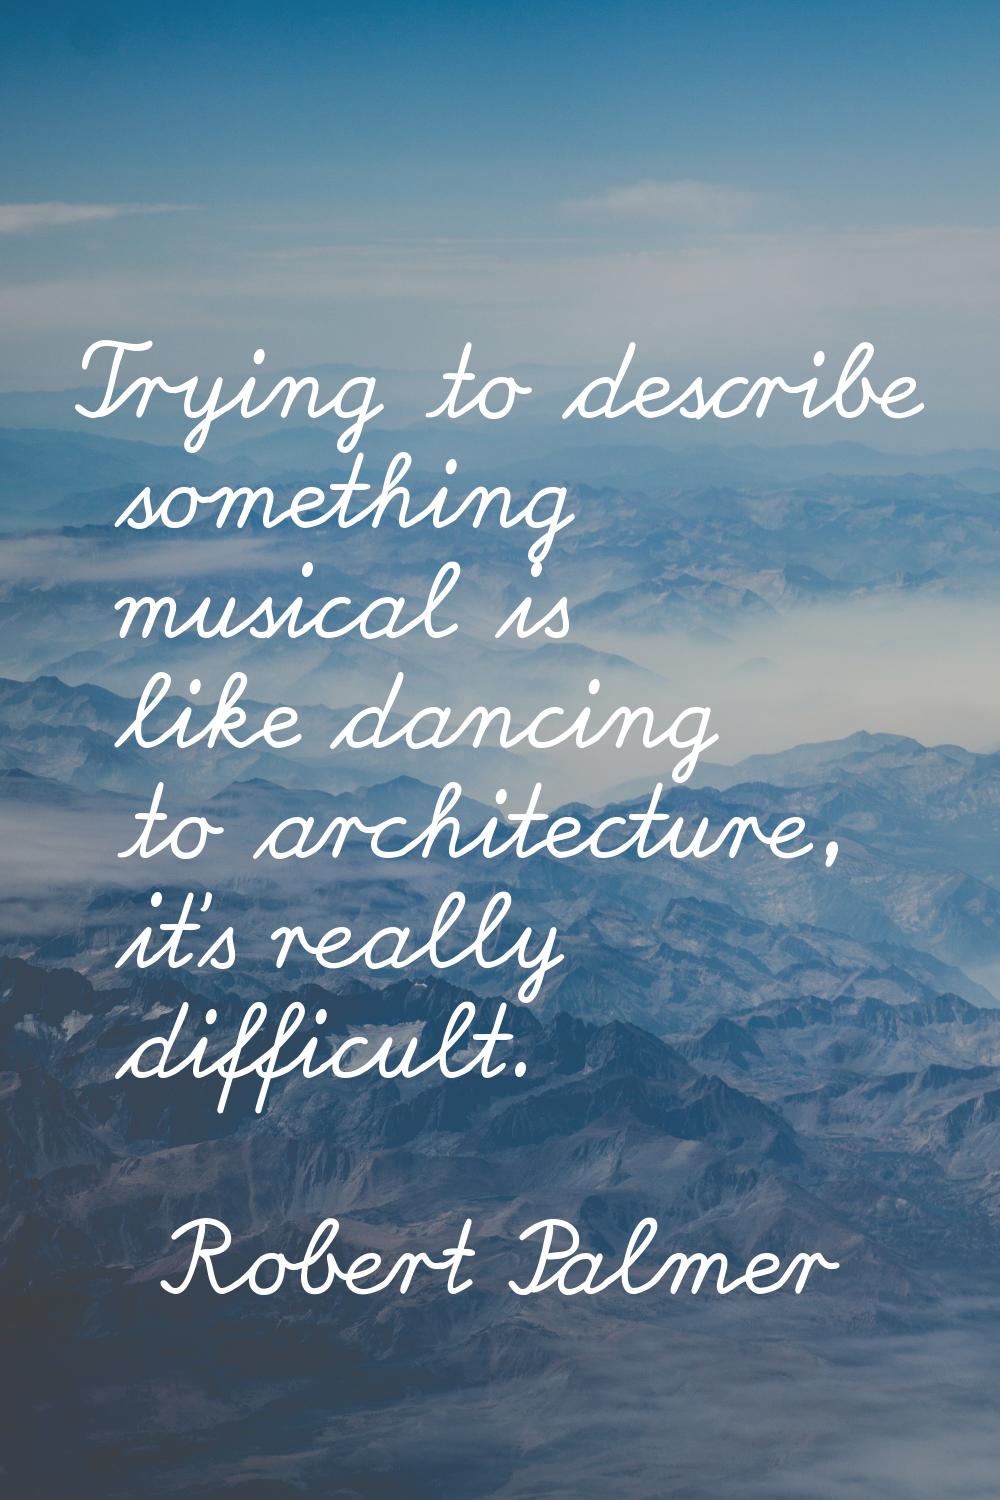 Trying to describe something musical is like dancing to architecture, it's really difficult.